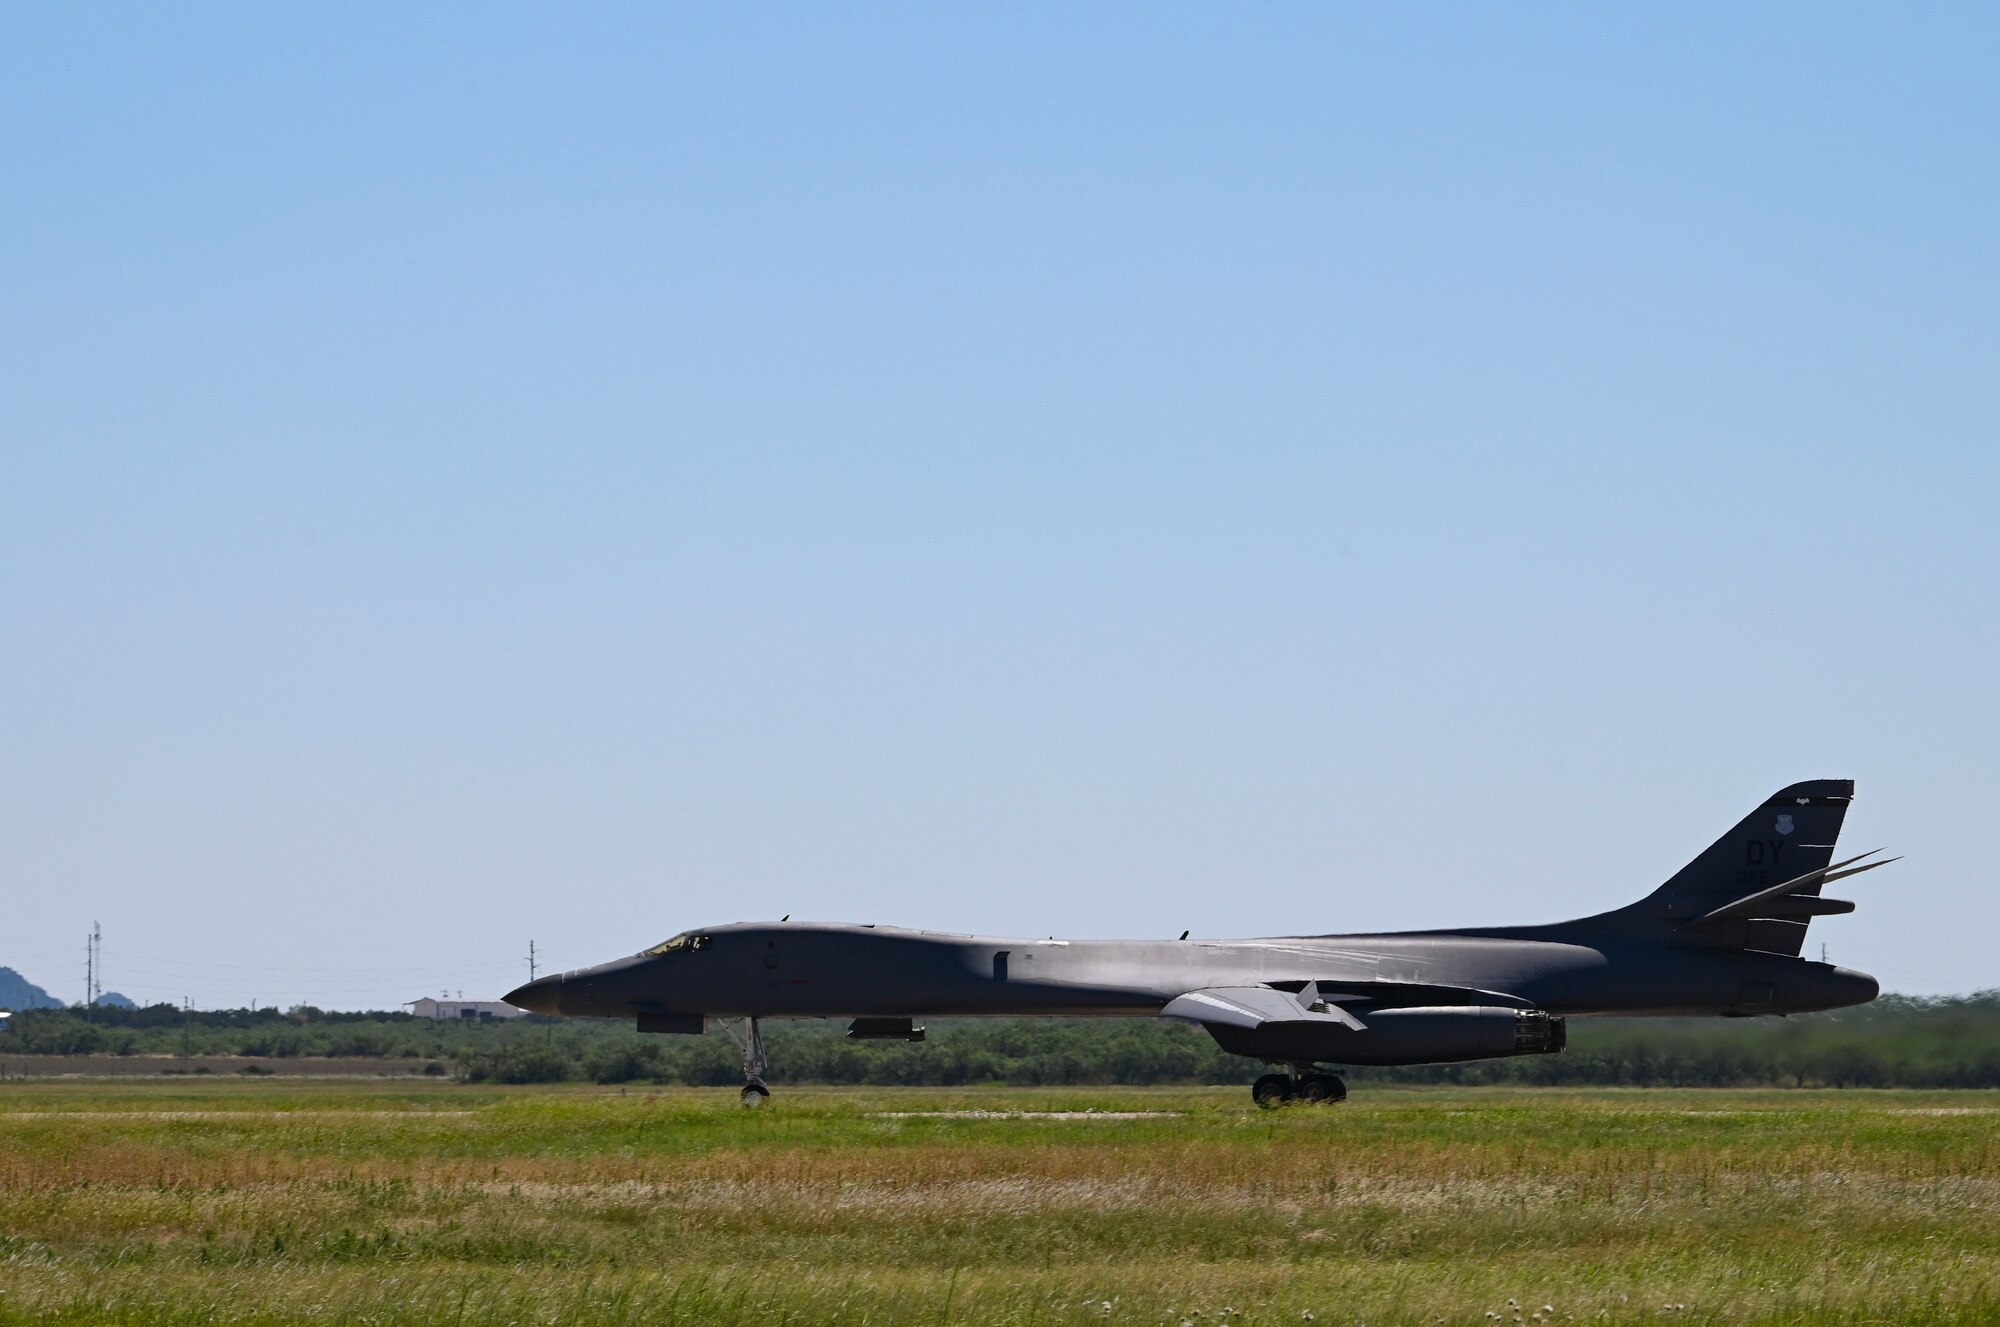 A B-1B Lancer taxis onto the flightline during a fini-flight for U.S. Air Force Col. Kevin Kippie, 7th Bomb Wing vice commander, at Dyess Air Force Base, Texas, June 29, 2023. Kippie served at Dyess from June 11, 2021, to June 16, 2023. While at Dyess, Kippie was committed to excellence as he fostered financial innovation and proposals for the installation, created a Wing Welcome Center for new Airmen and worked in integrated teams to action the wing’s fiscal efforts. (U.S. Air Force photo by Airman 1st Class Emma Anderson)